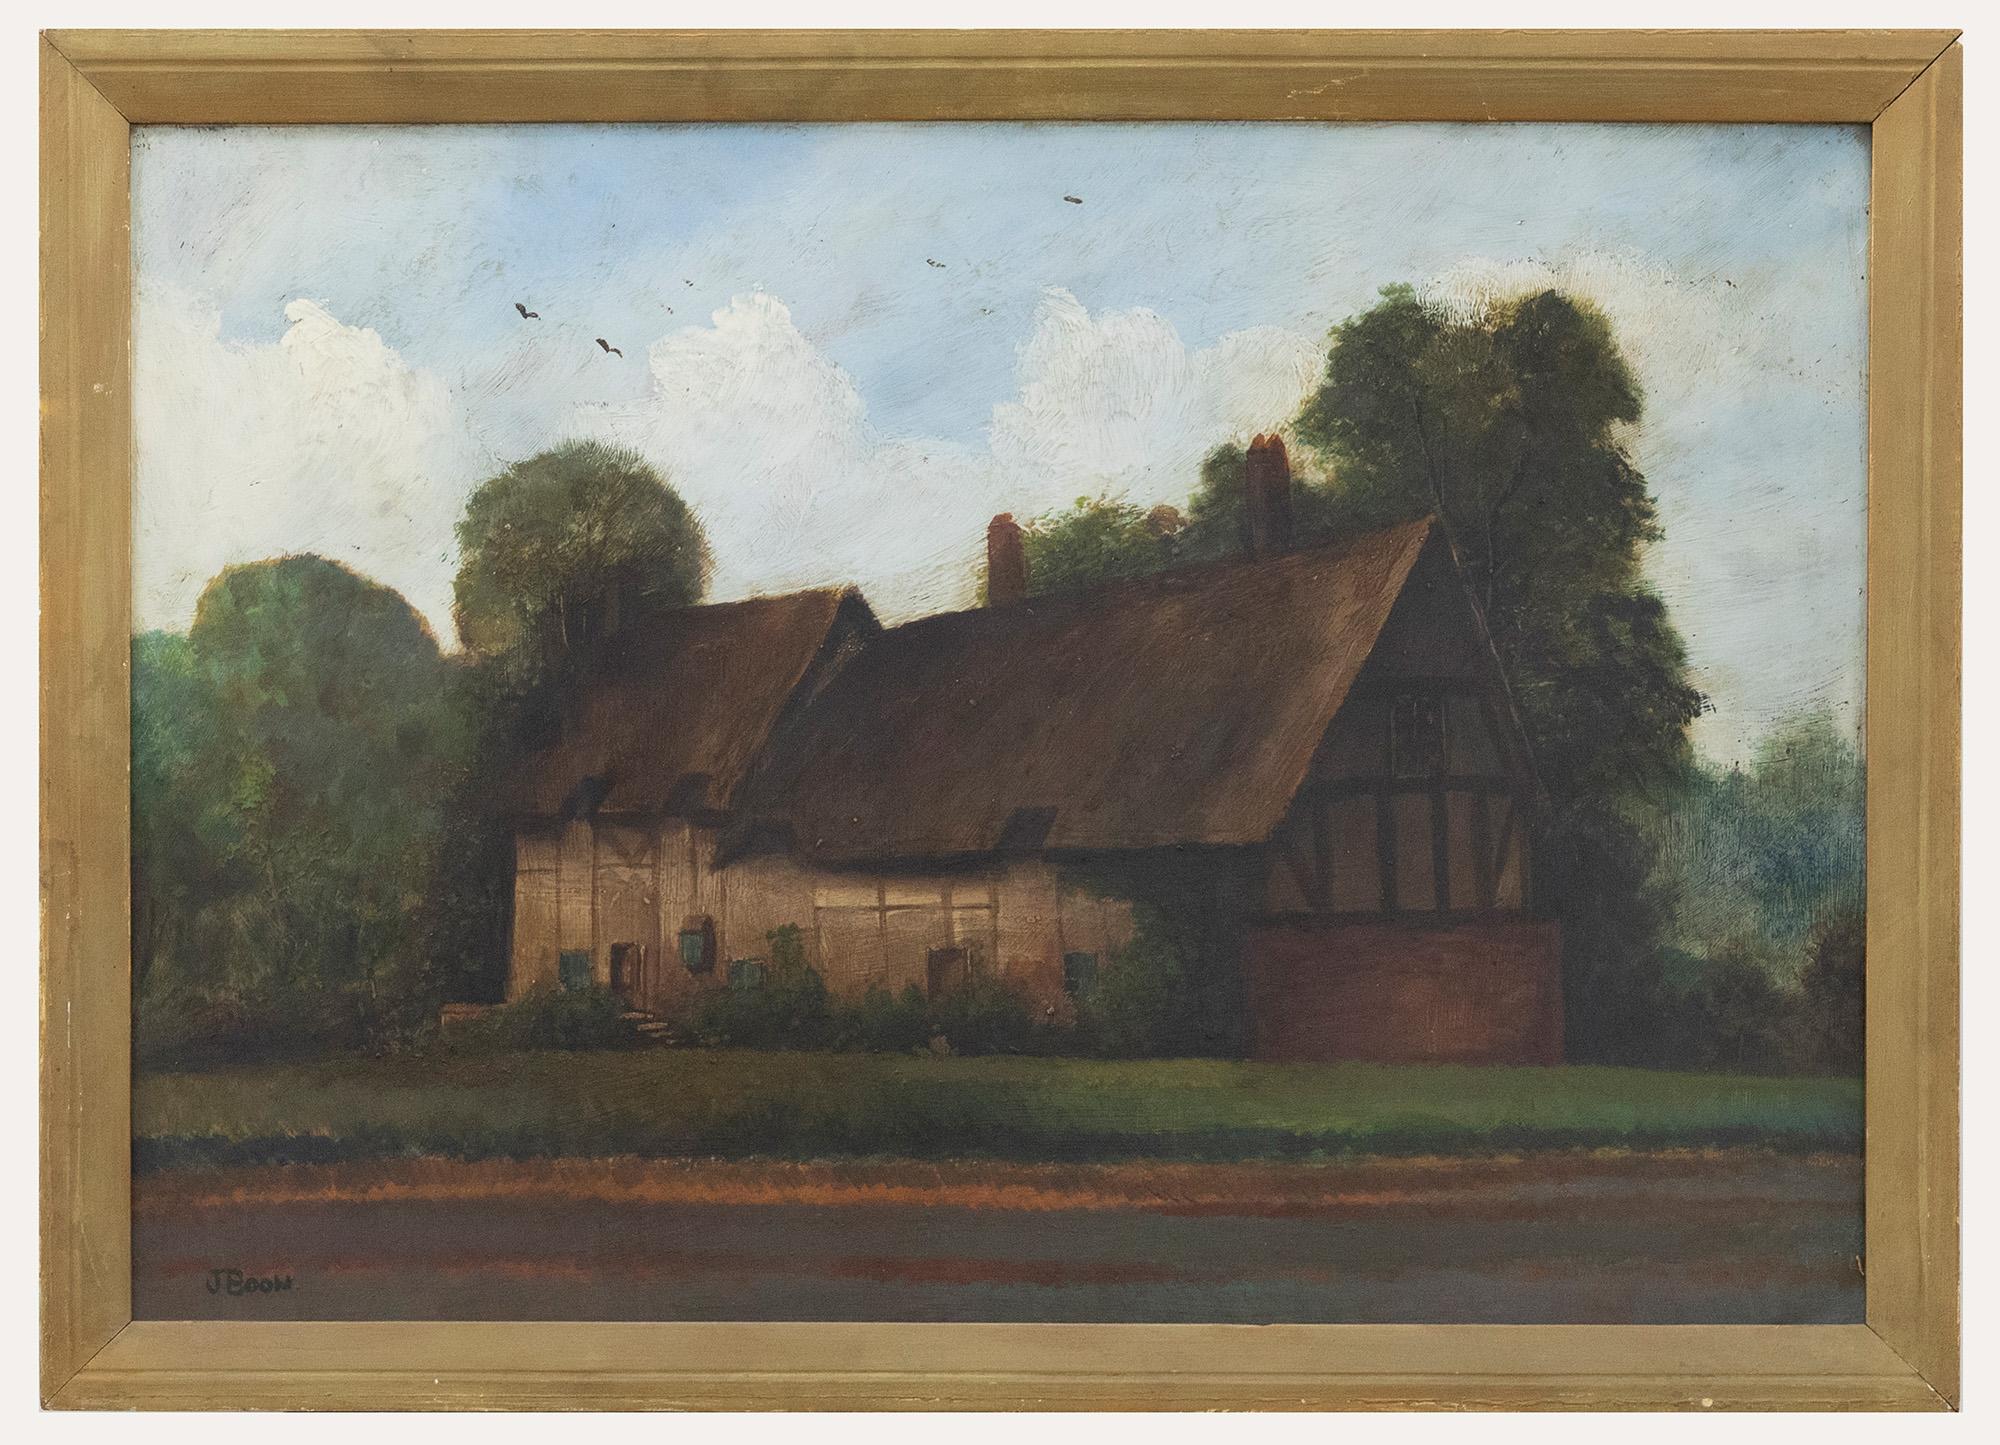 Unknown Landscape Painting - J. Boon - Framed Mid 20th Century Oil, Thatched Cottage Scene